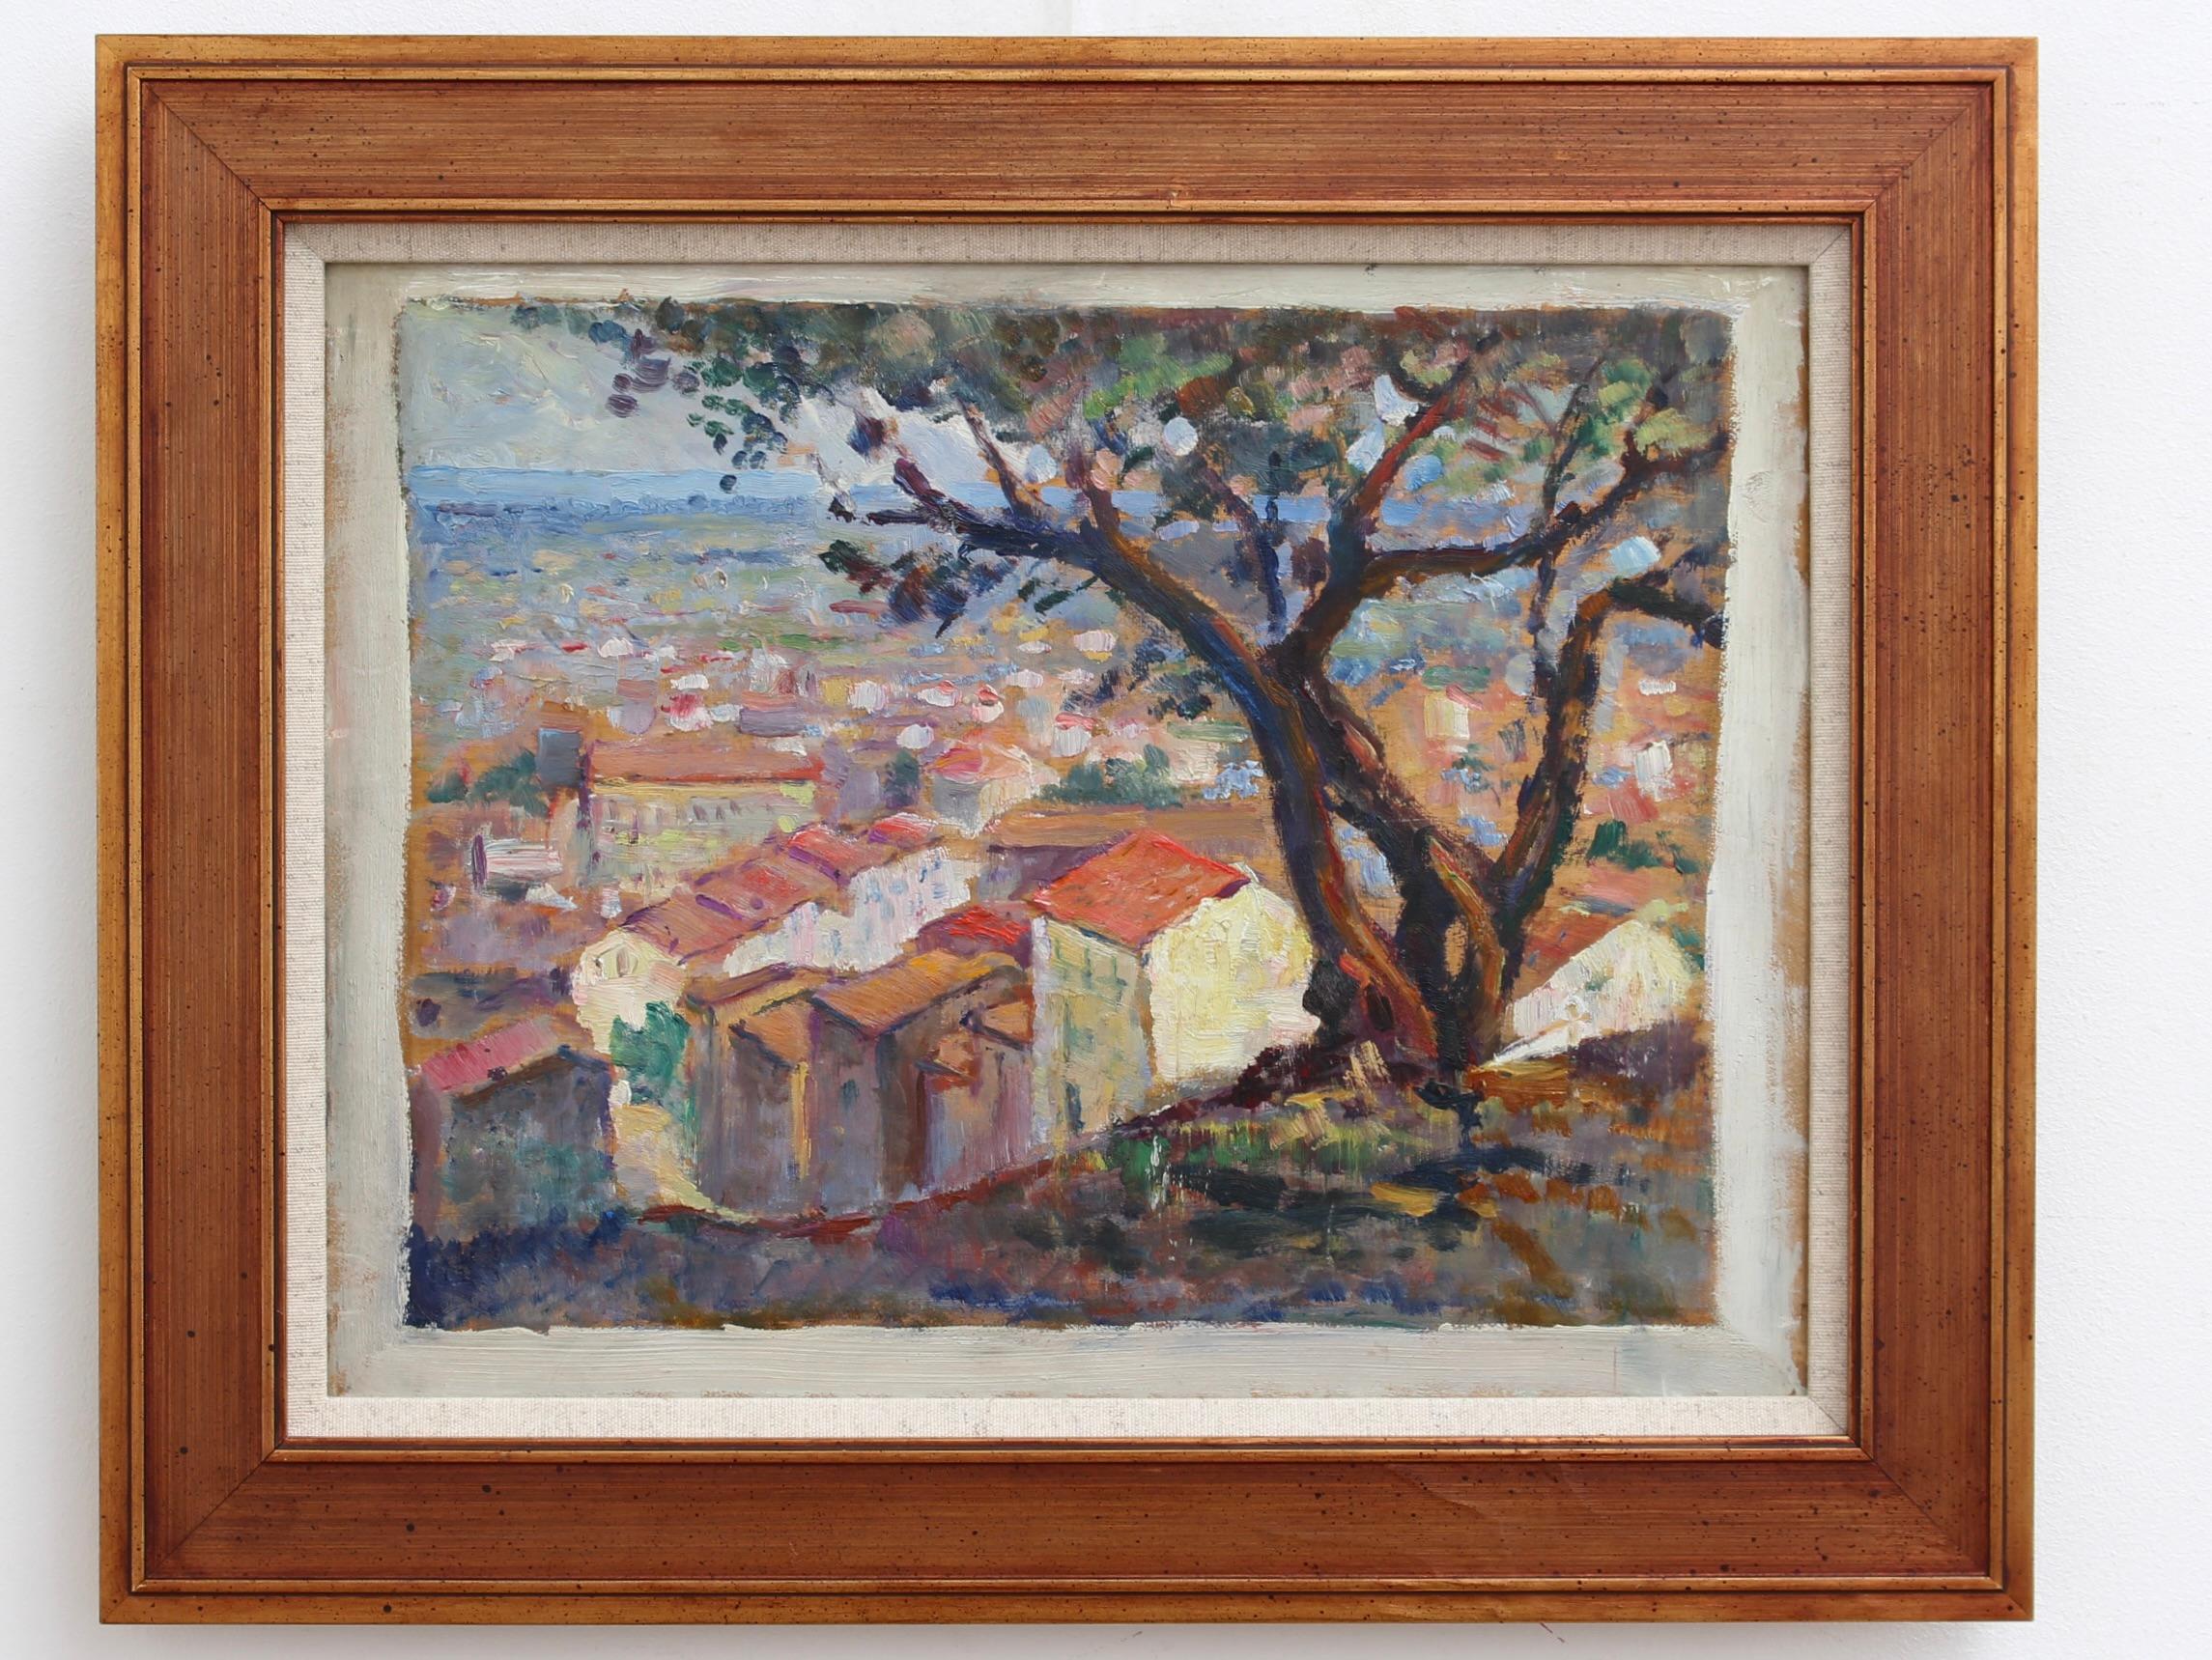 Unknown Landscape Painting - 'French Riviera View', French School (circa 1950s)